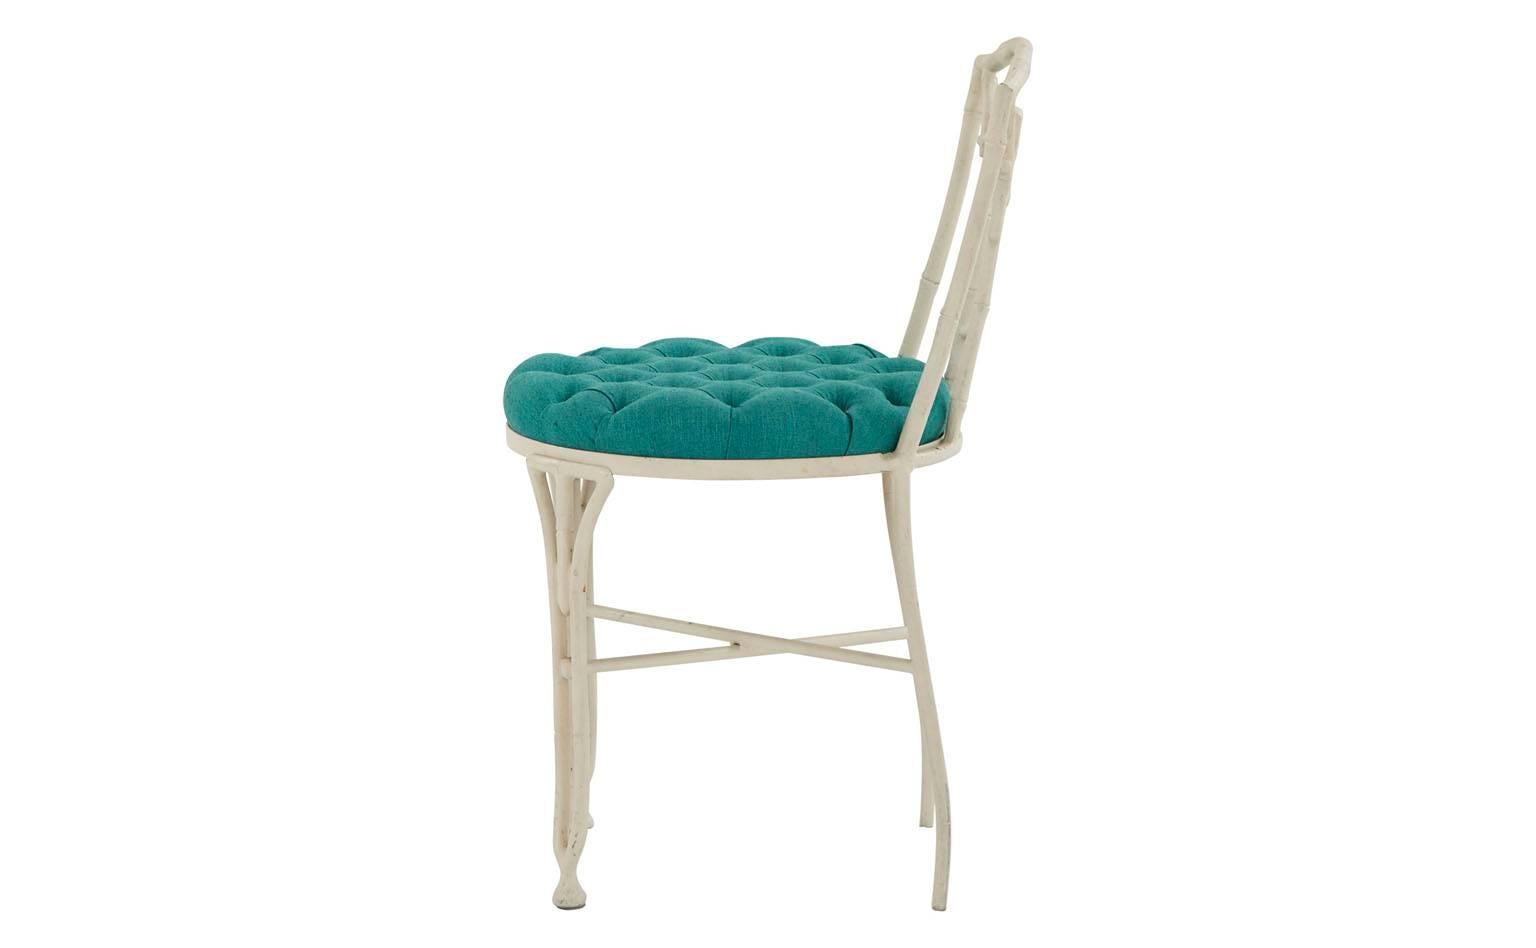 American Classical Faux Bamboo Chair